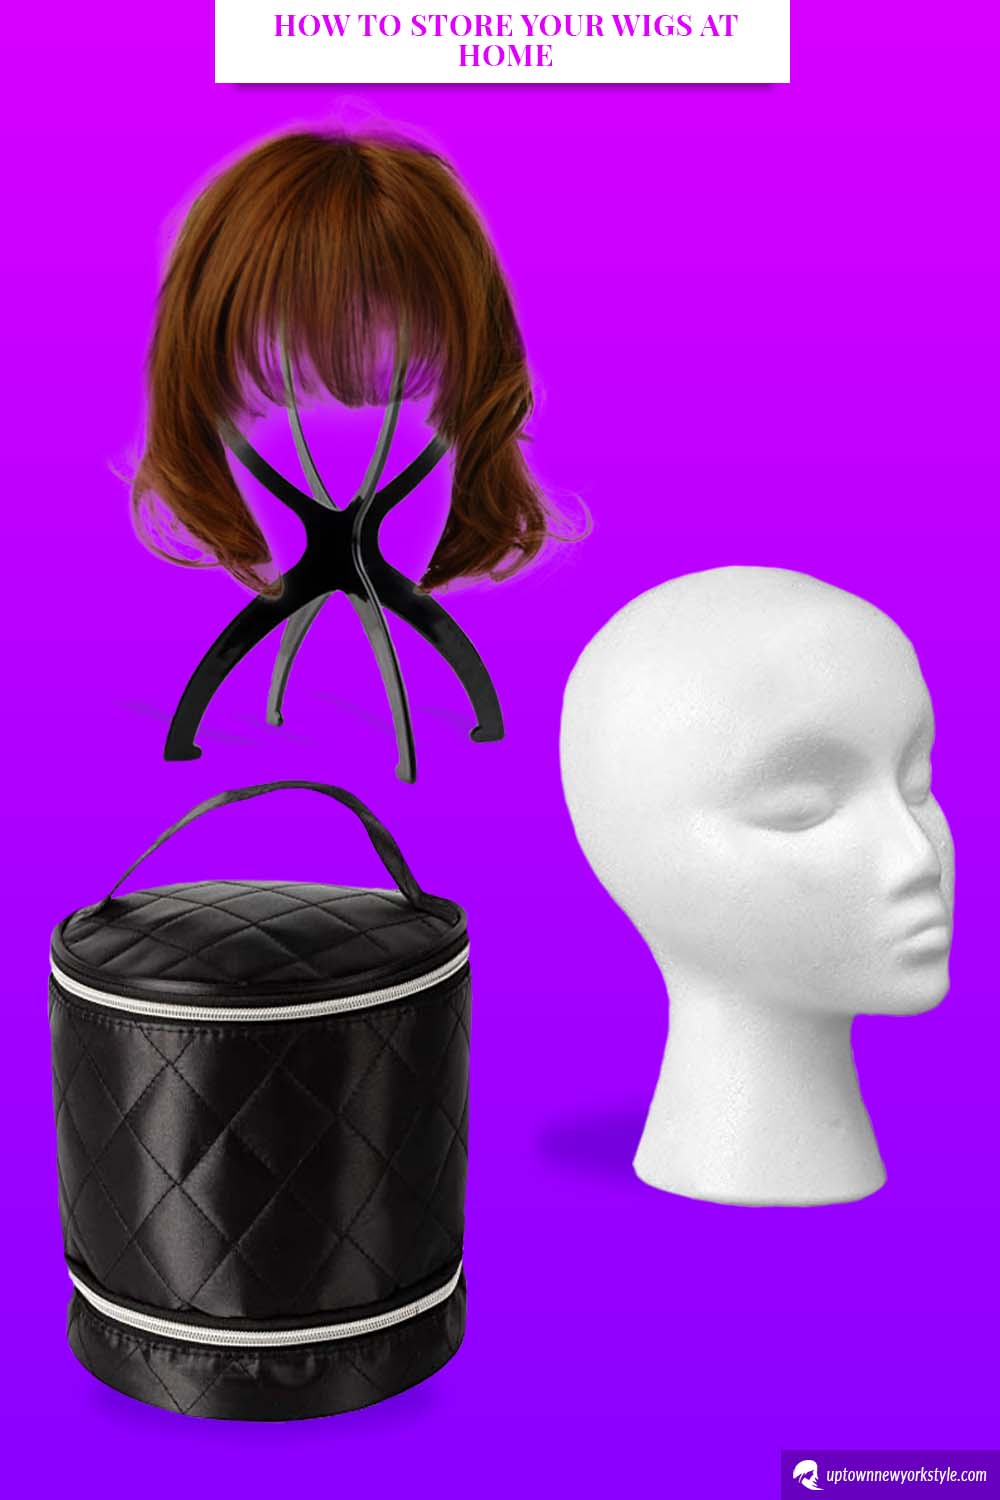 How To Store Your Wigs At Home